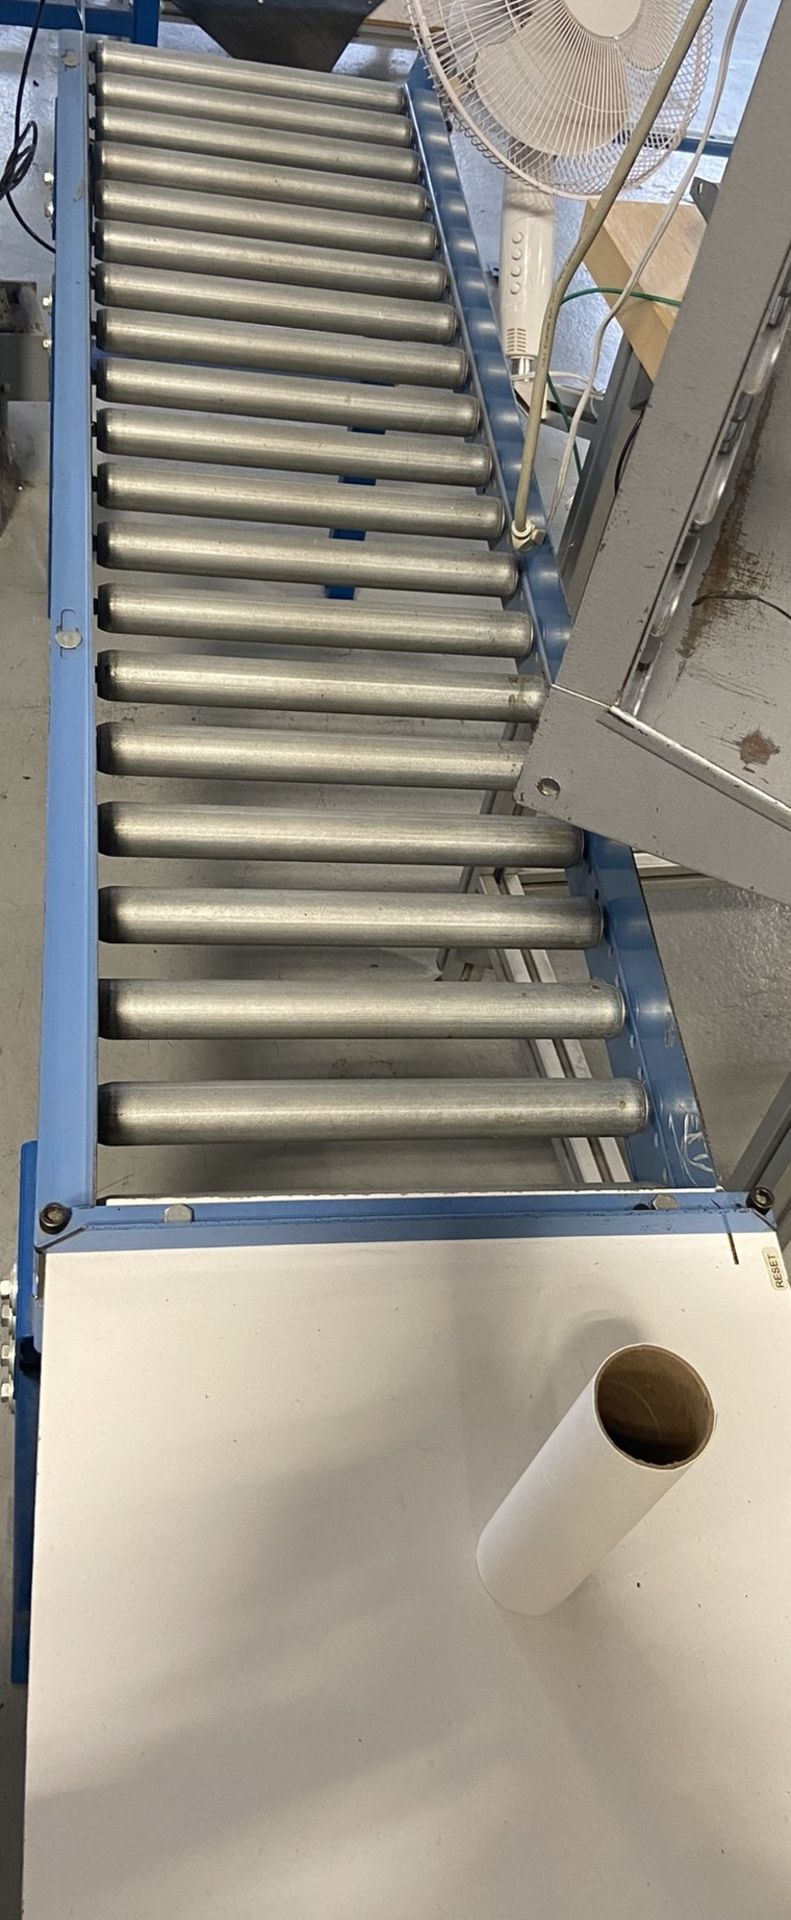 Gravity Roller Conveyors - Multiple (20+) - Image 5 of 21